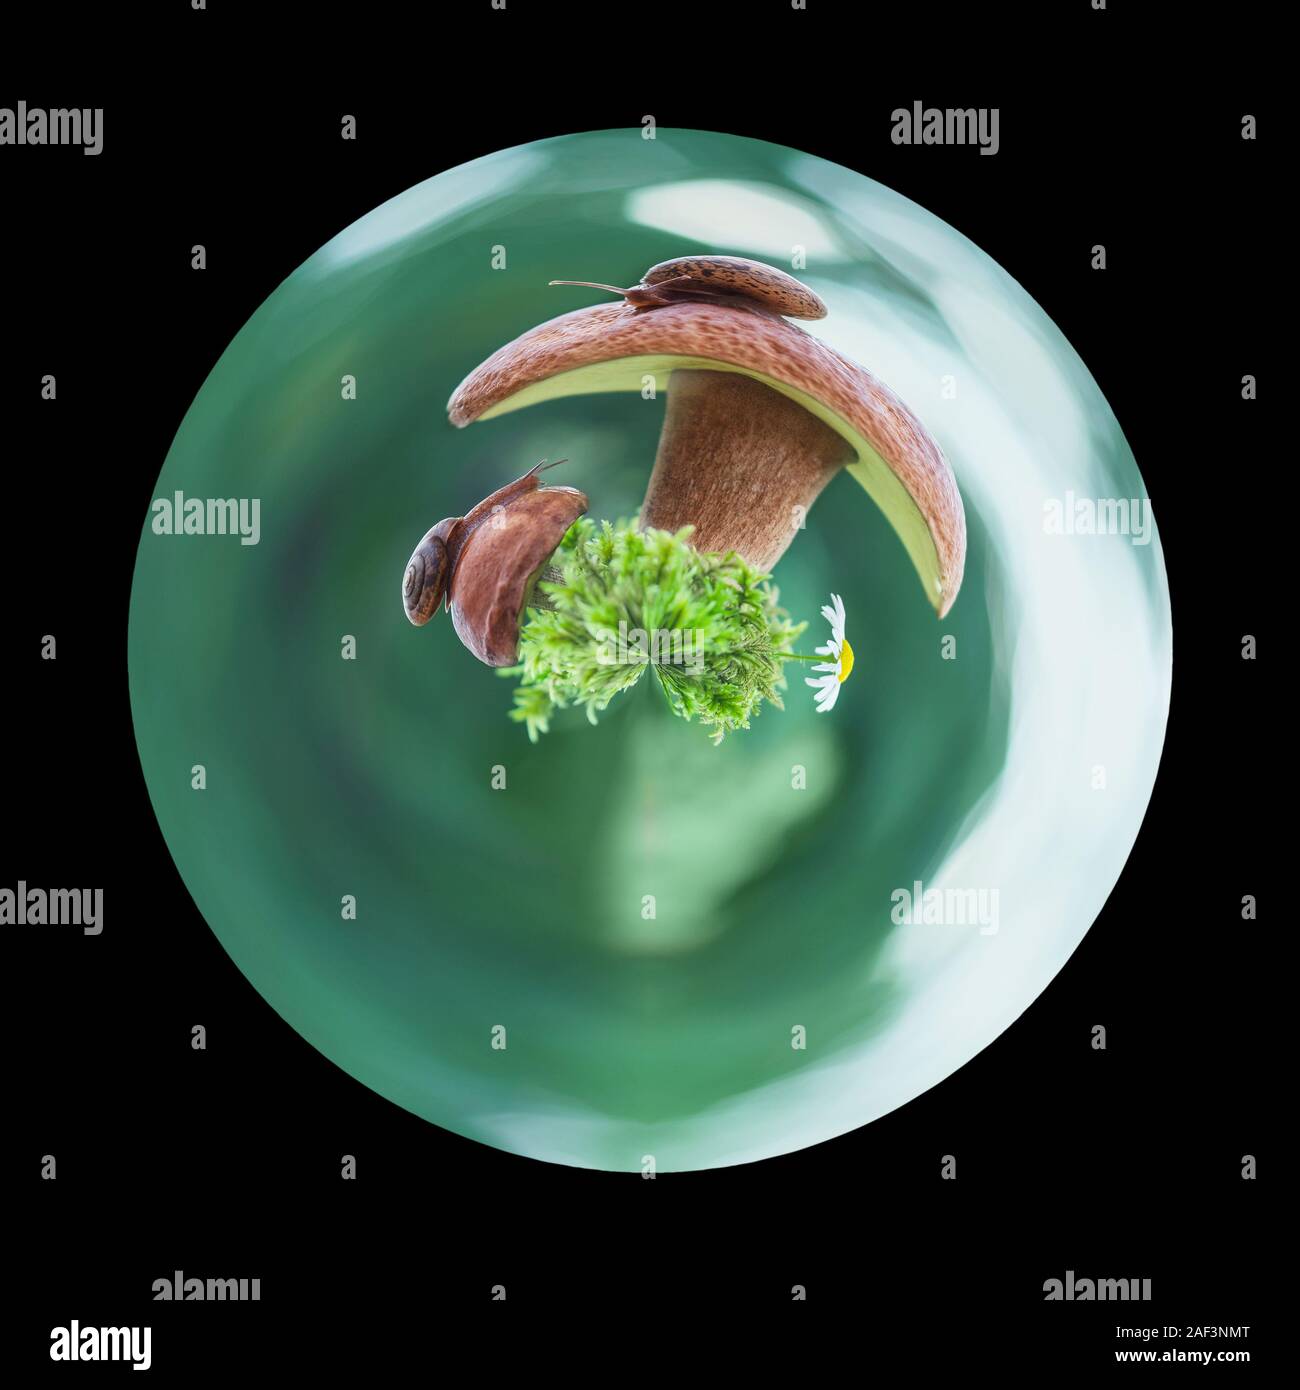 Planet with snails sitting on porcini mushrooms. Stock Photo